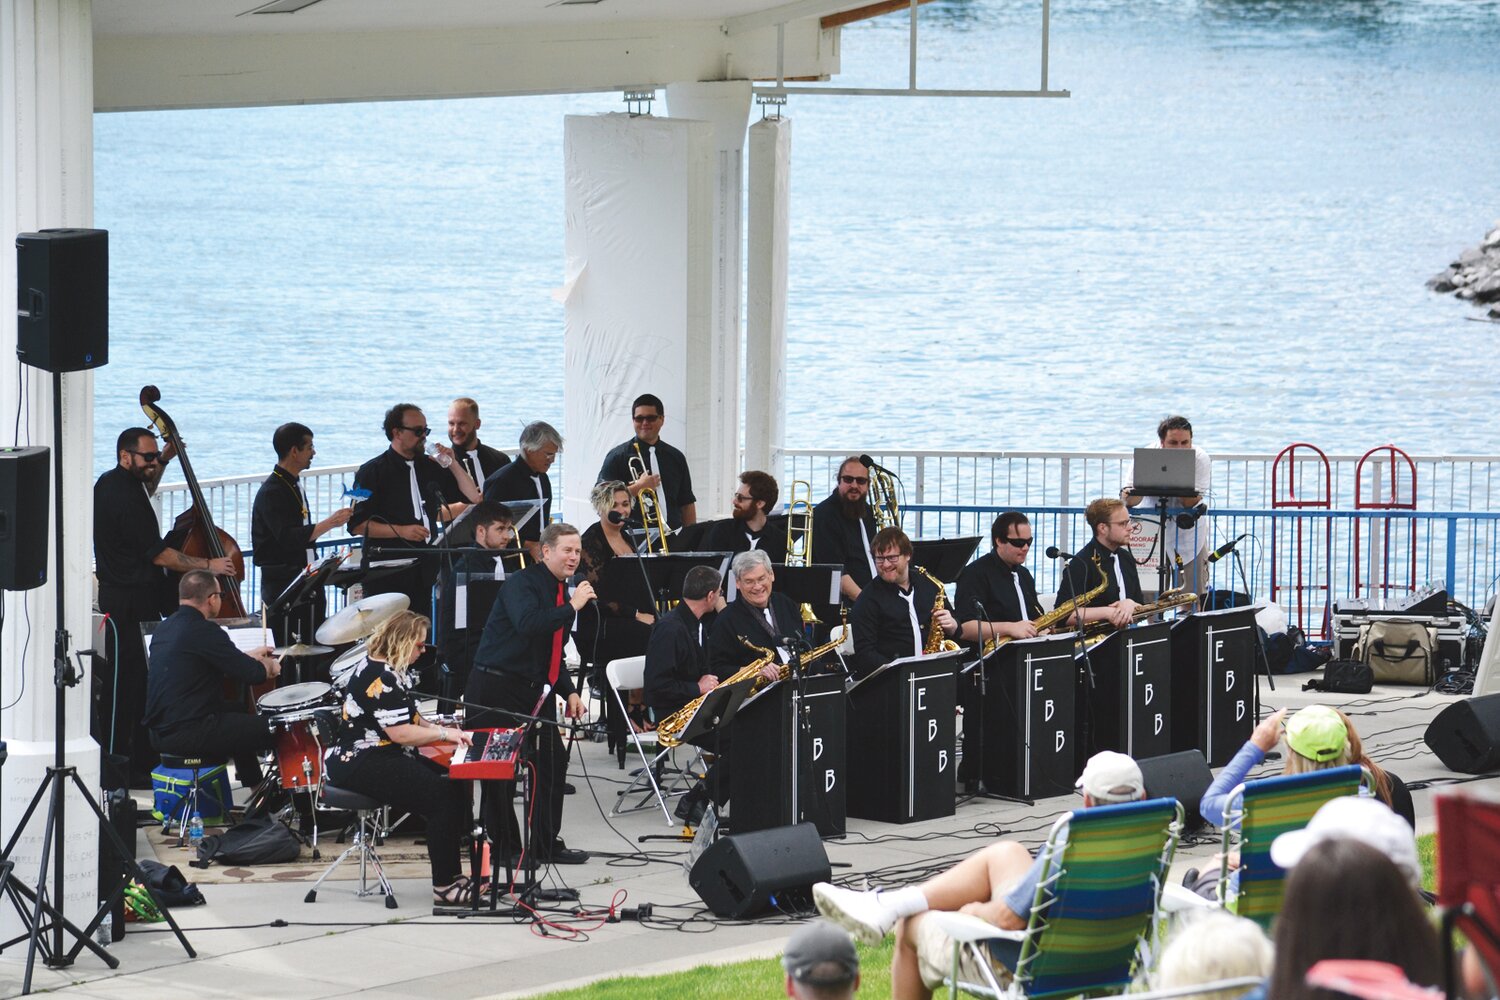 Photo by Ruth Edna Keys/LCM
Ellensburg Big Band playing a free concert at Riverwalk Pavillion on Sunday, May 23. This will be the site of the free summer concert series in Chelan